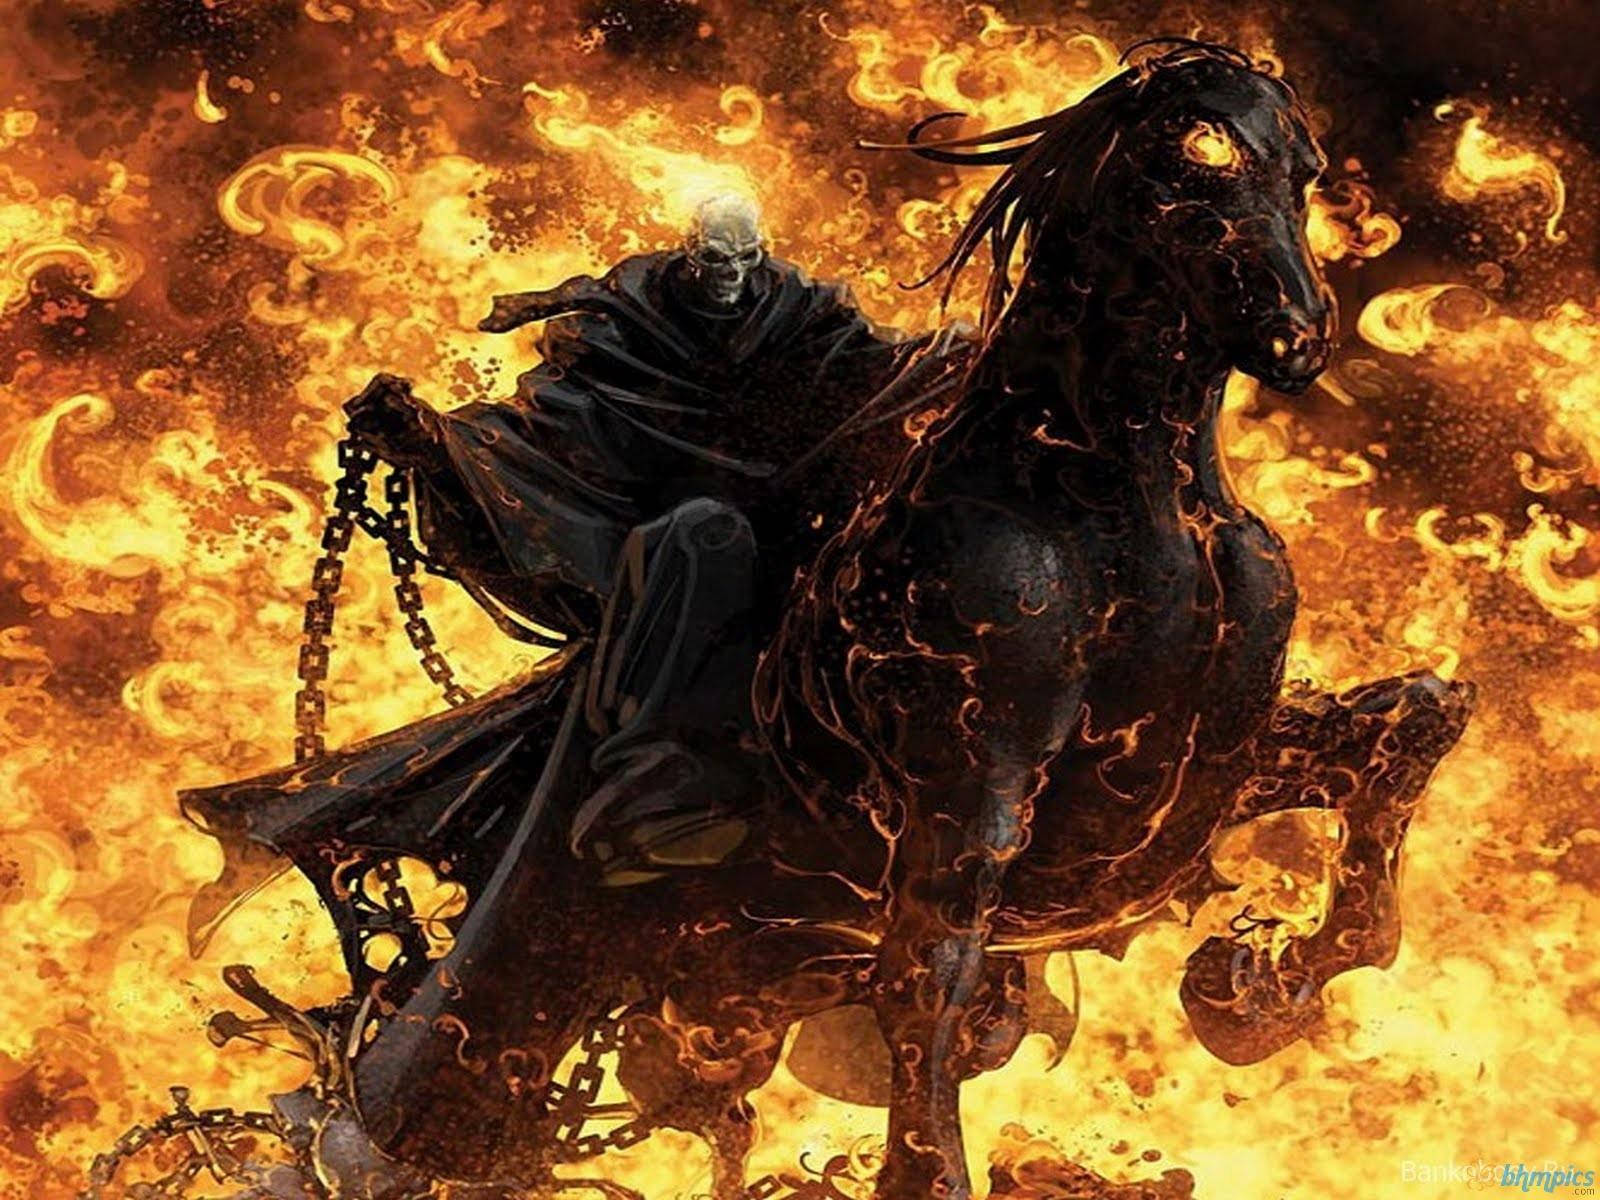 Cool 3d Ghost Rider In Horse